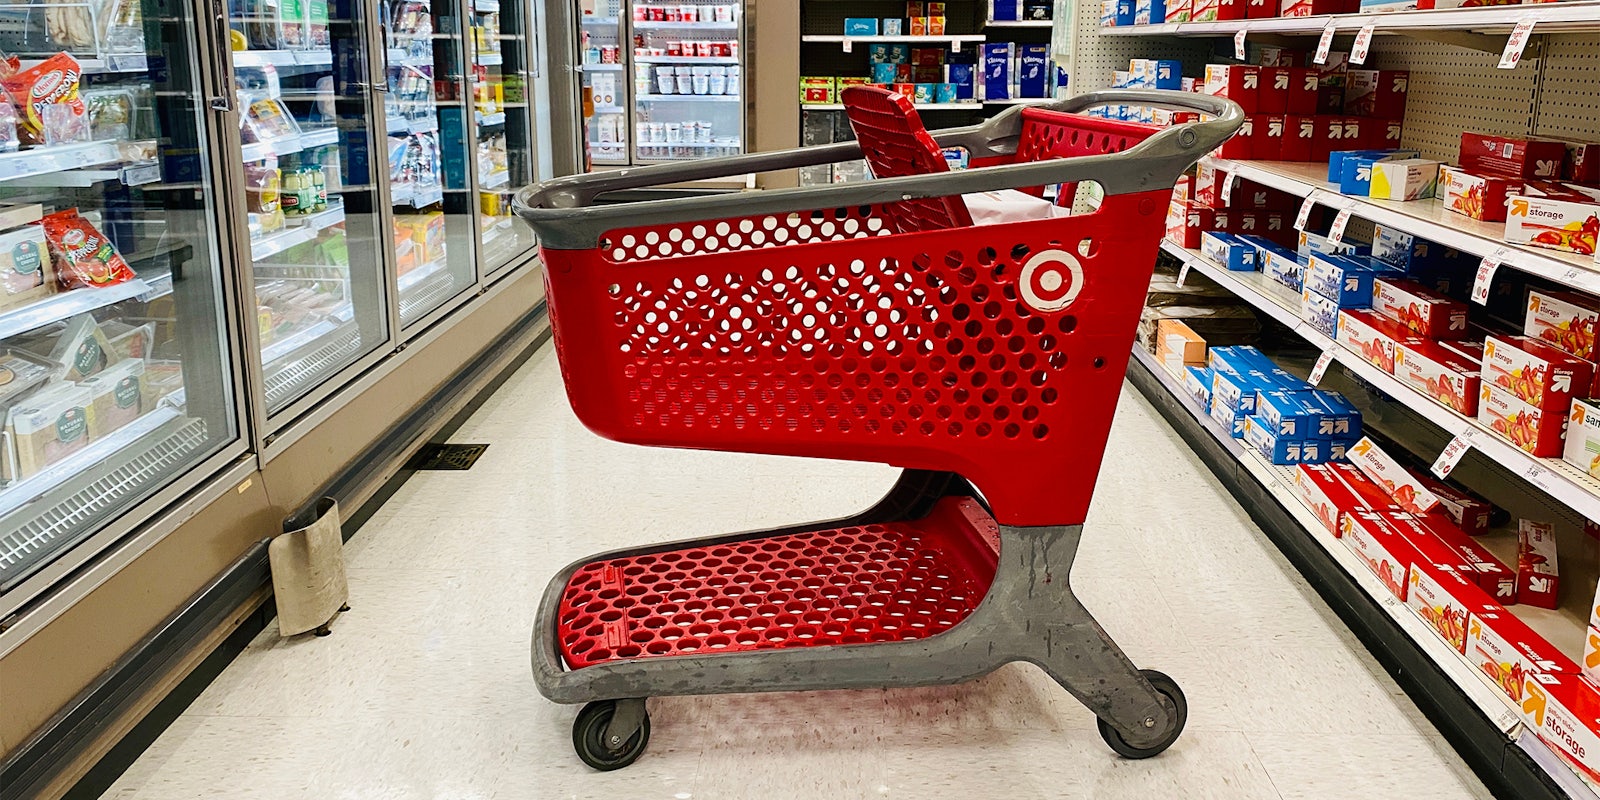 Red Target store shopping cart inside the aisles.